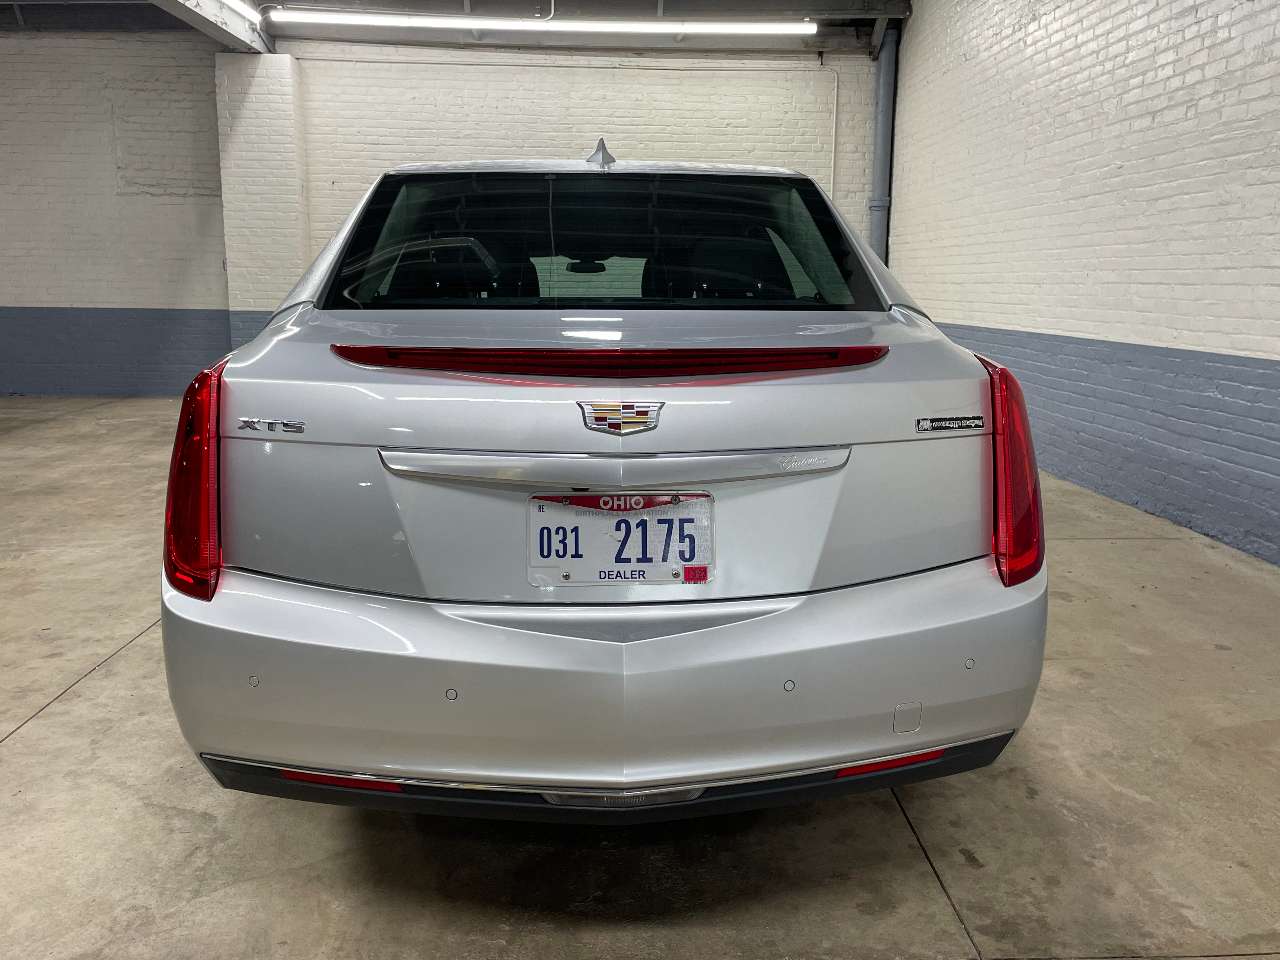 2017 Cadillac Armbruster Stageway XTS L6 Limousine 1659102139897